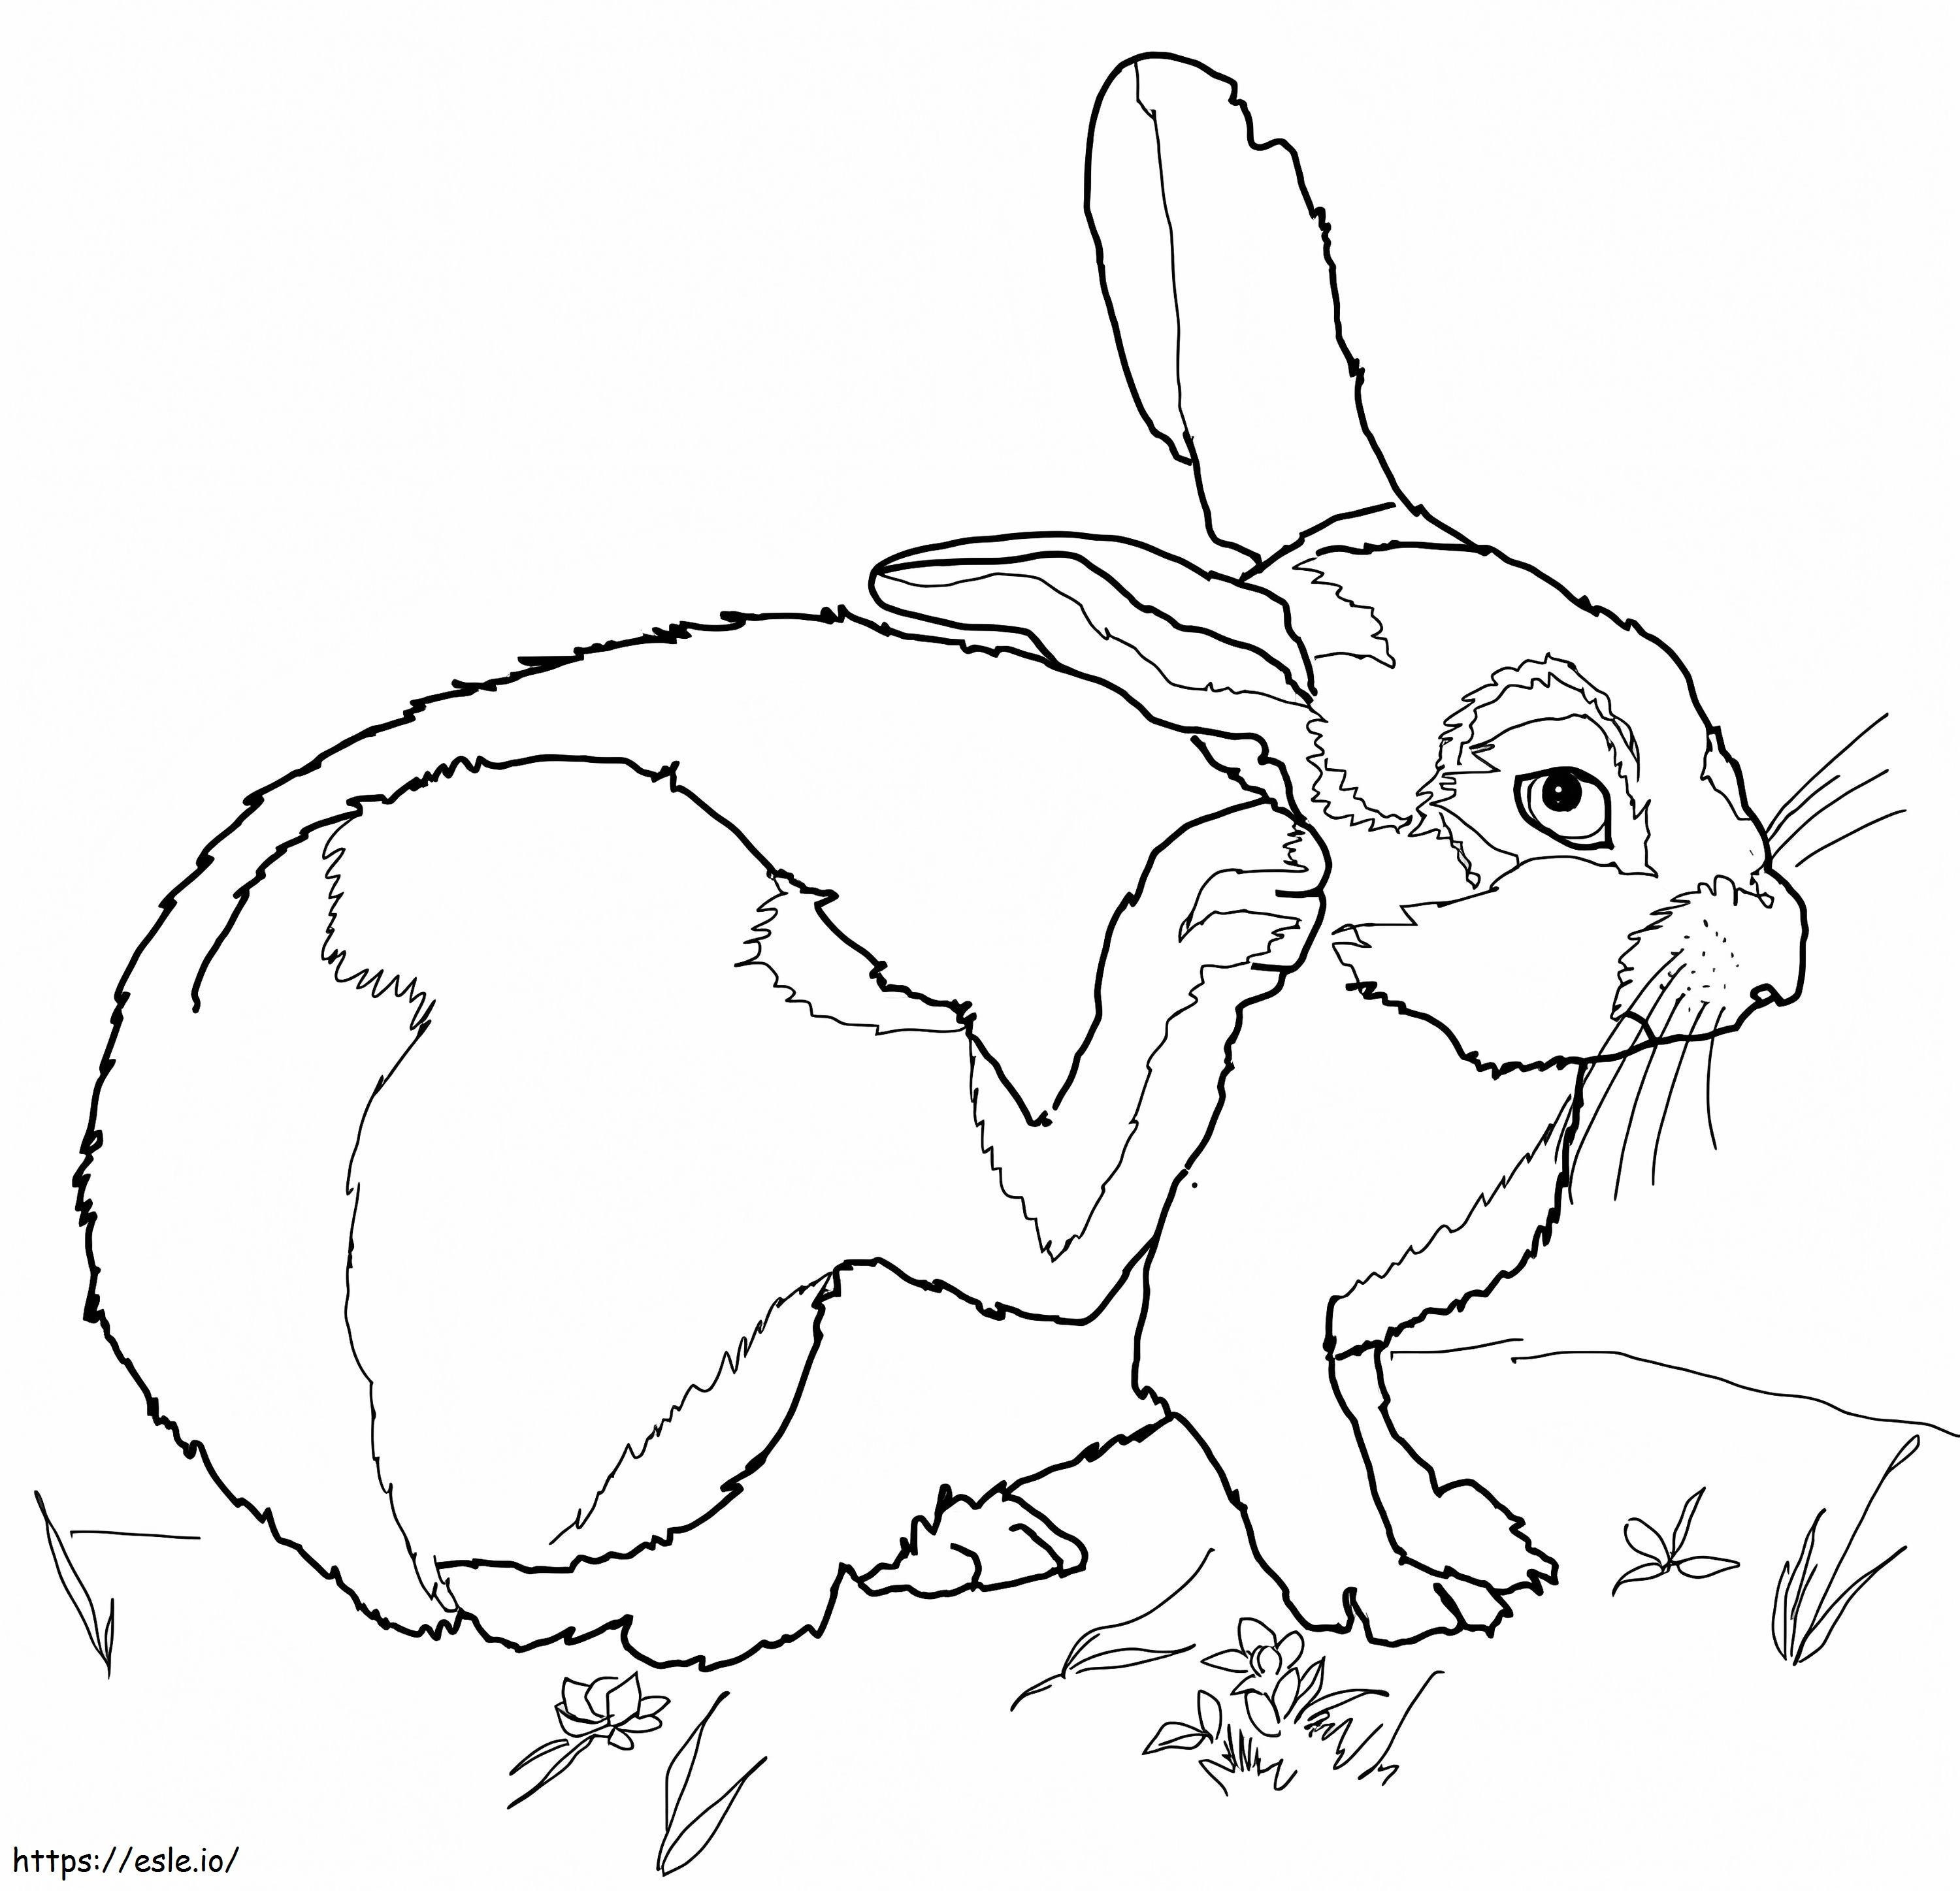 Desert Cottontail coloring page